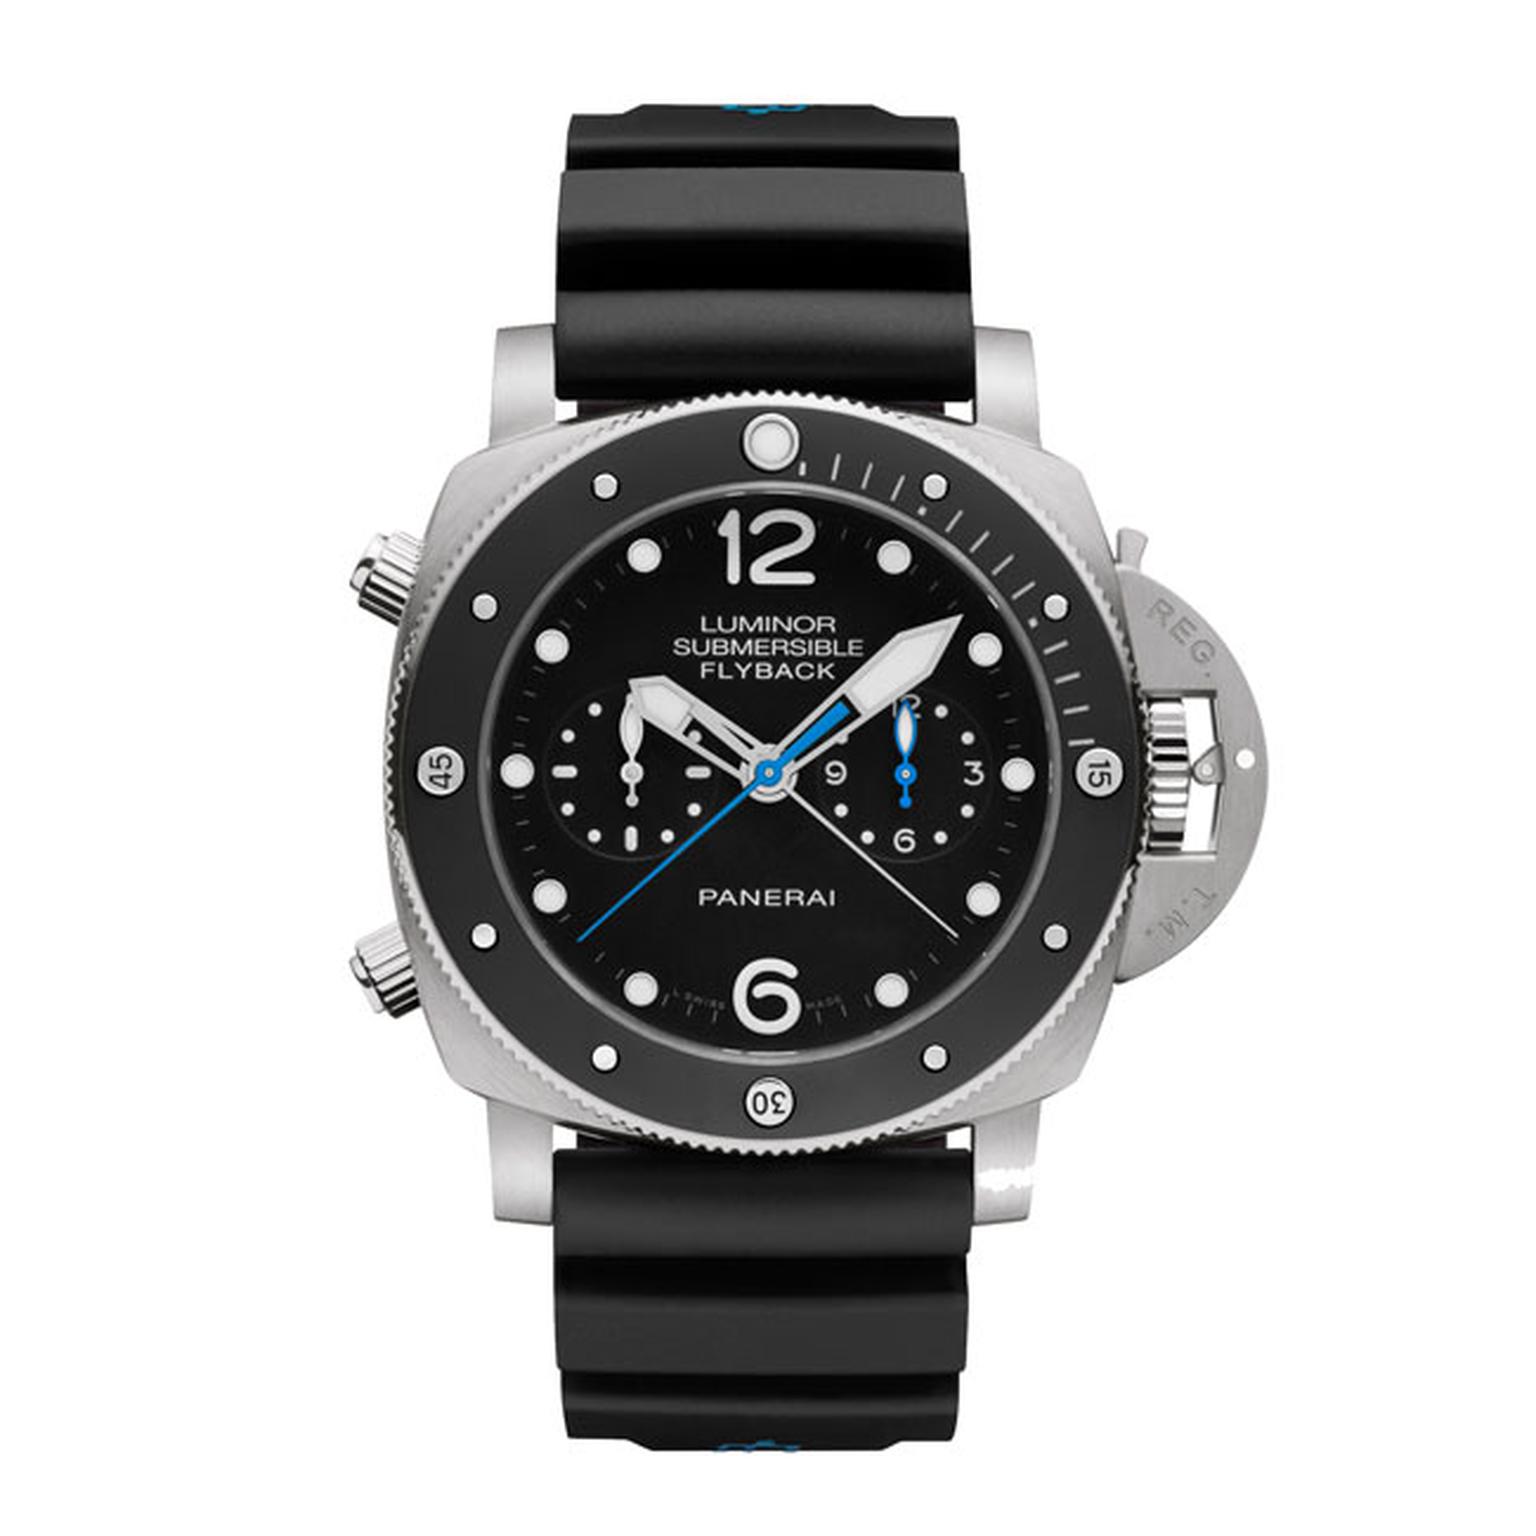 Panerai Luminor Submersible 1950 Flyback Chrono watch in titanium with a ceramic bezel